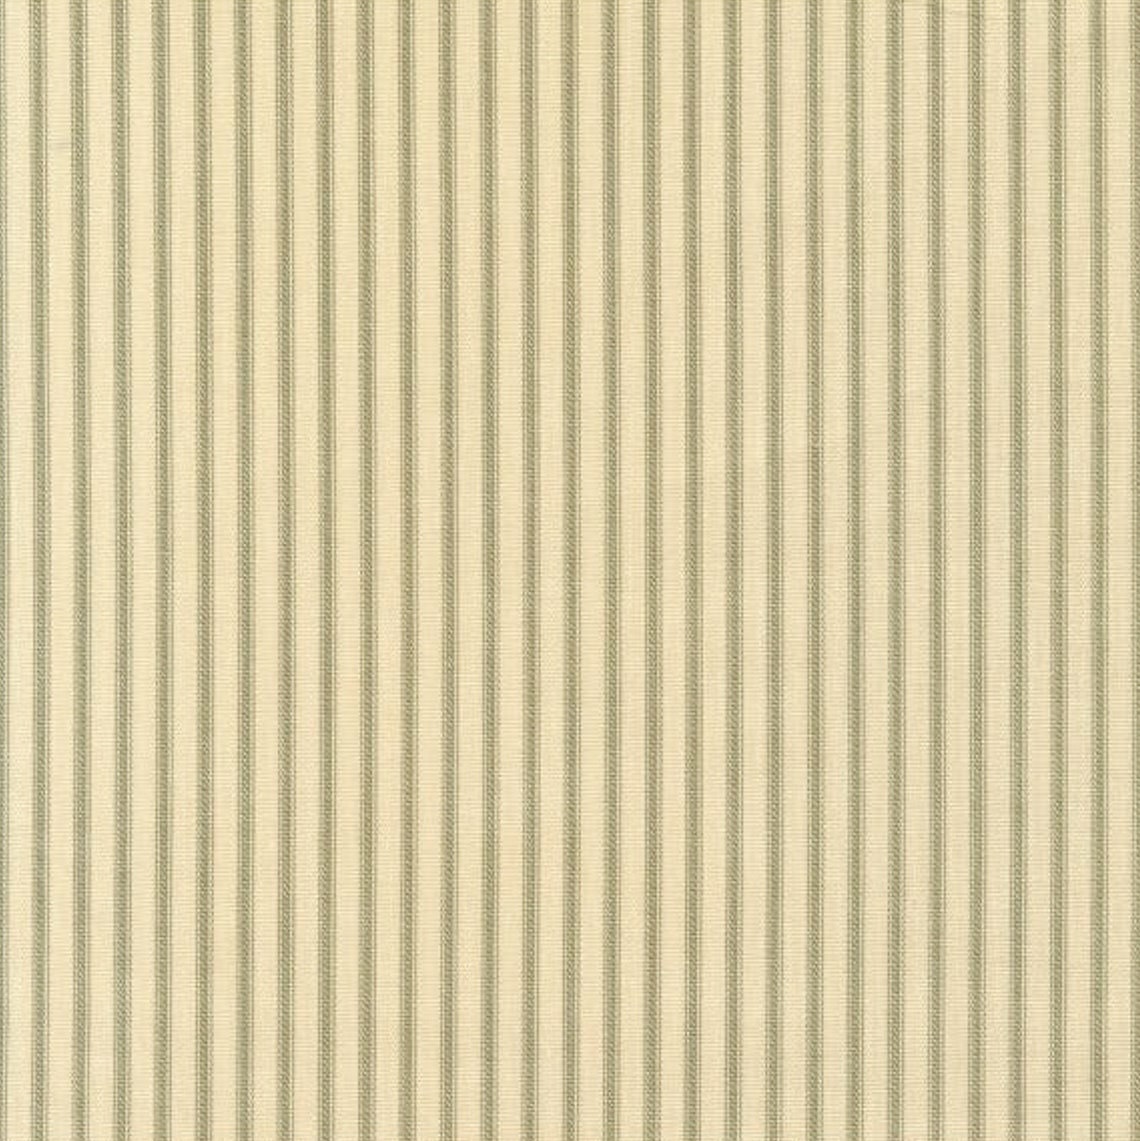 tailored tier cafe curtain panels pair in farmhouse pine green ticking stripe on beige